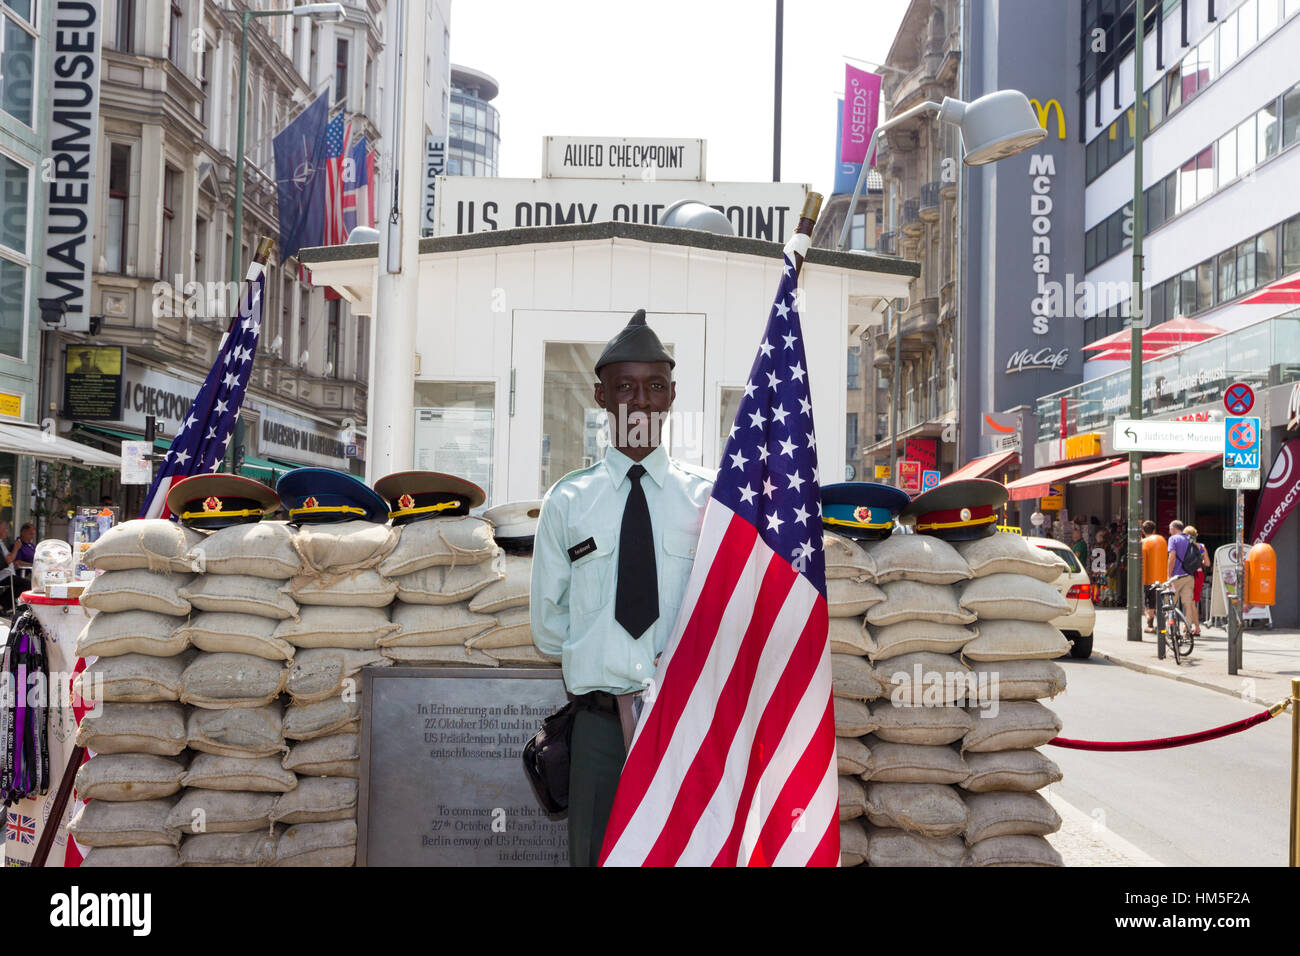 BERLIN, GERMANY - MAY 23: Man dressed as a US Army soldier stands with an American flag at the former Allied checkpoint 'Charlie' on May 23, 2014. Now Stock Photo